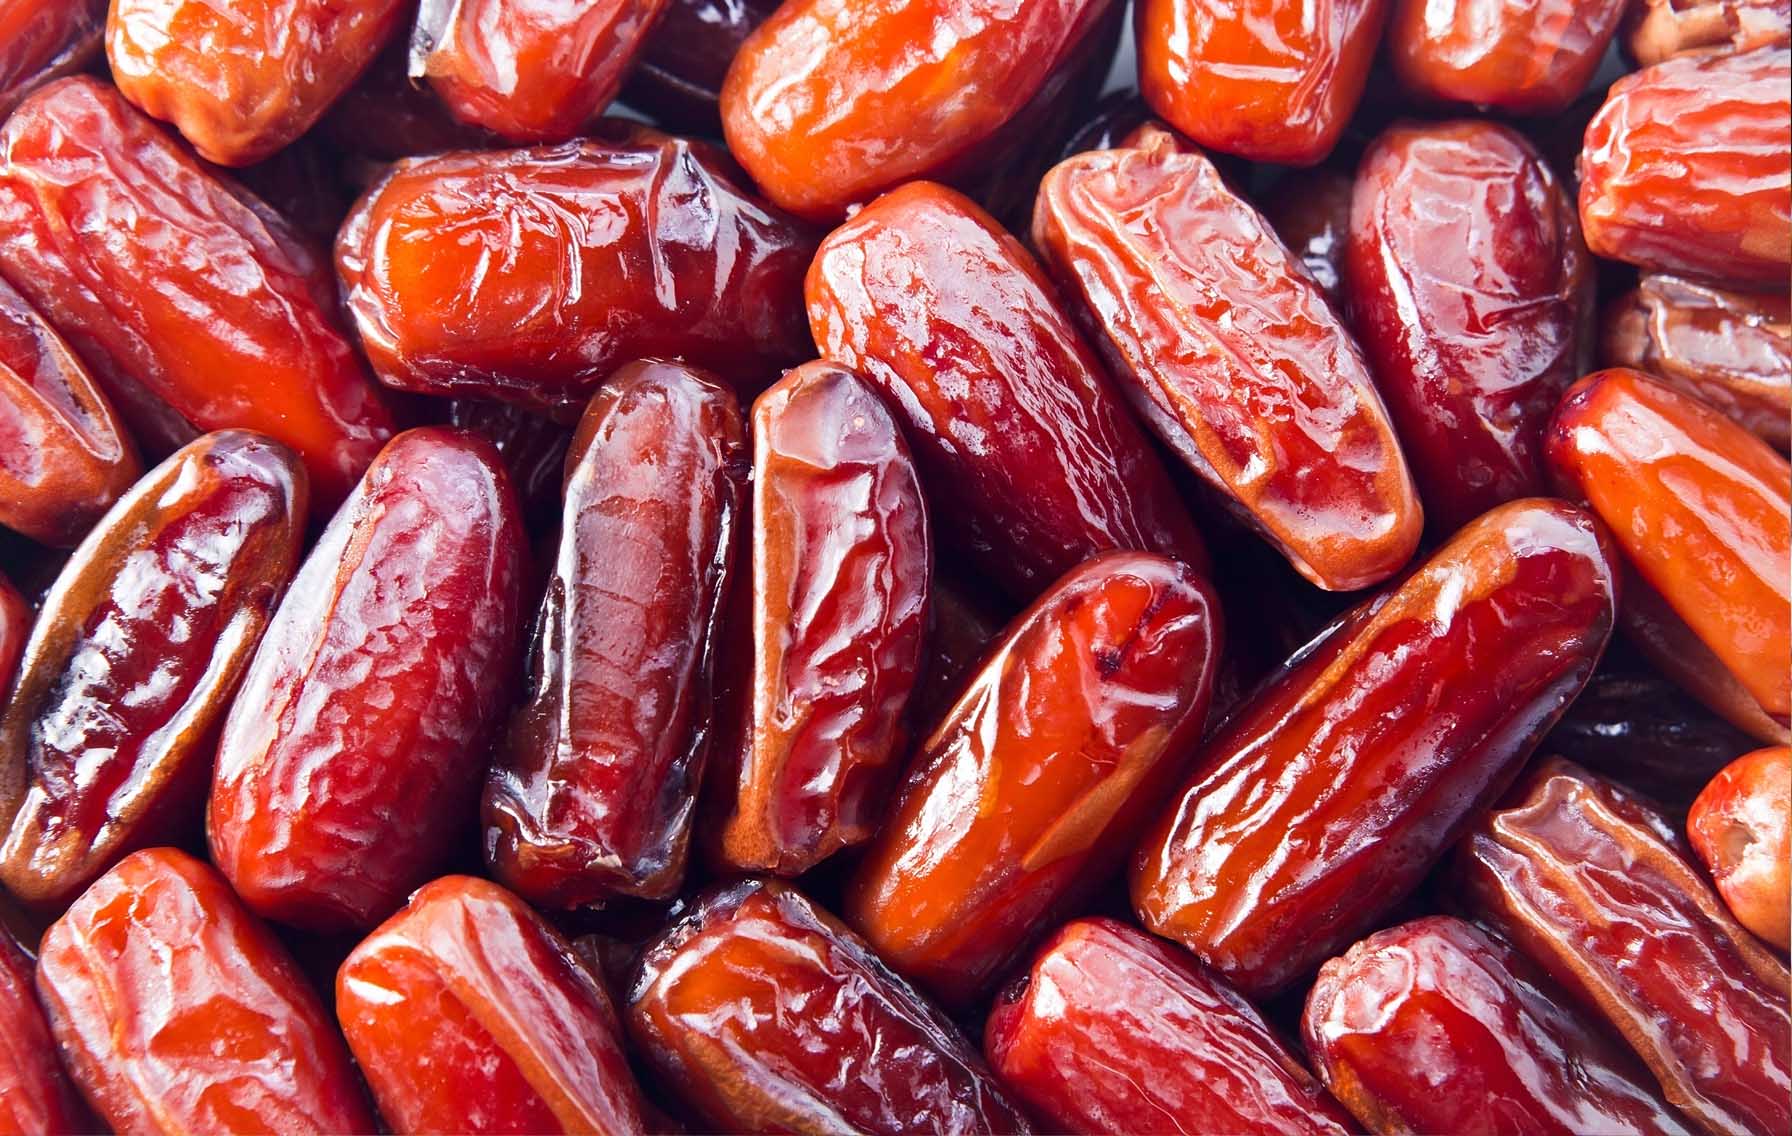 Are Dates Good for Constipation?